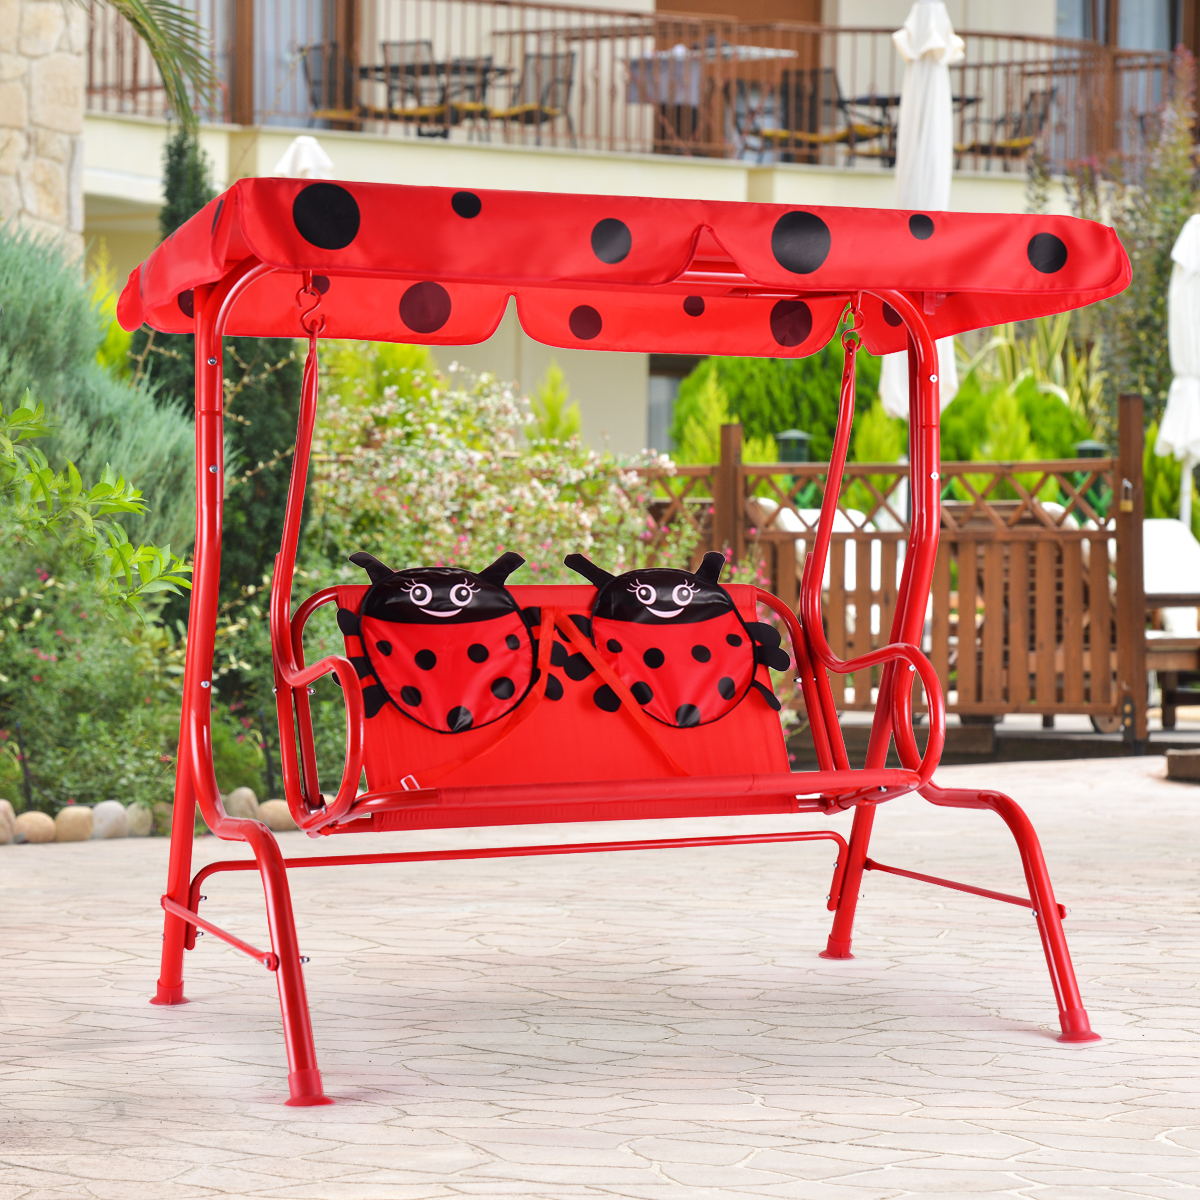 Costway Kids Patio Swing Chair Children Porch Bench Canopy 2 Person Yard Furniture red - image 5 of 10